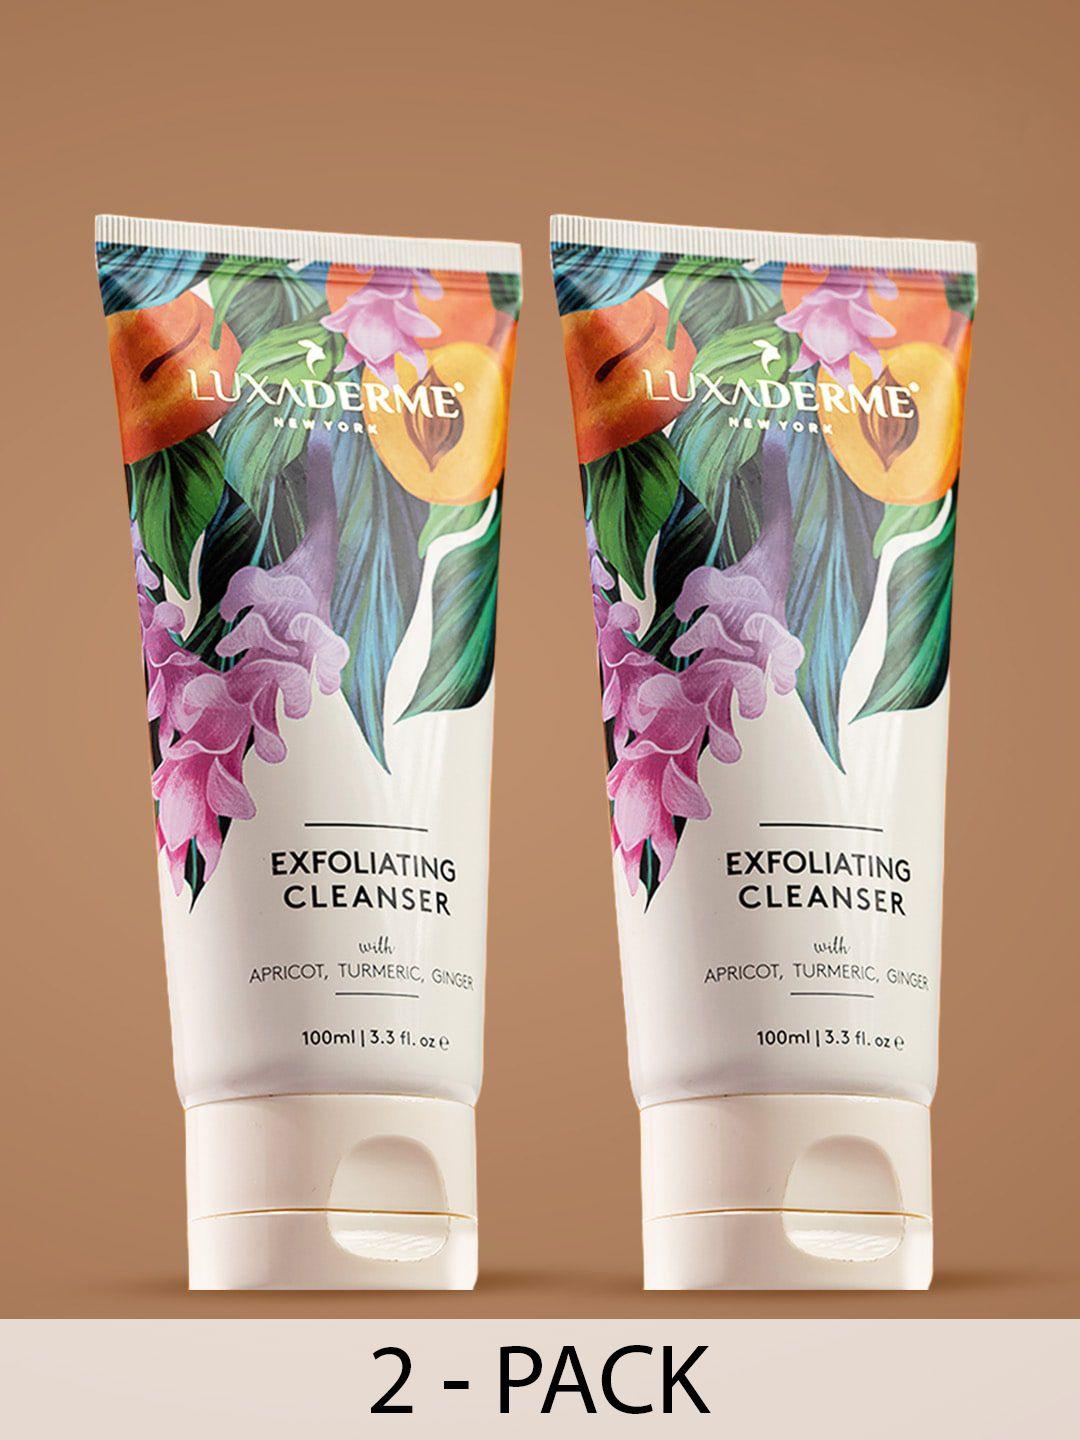 luxaderme set of 2 exfoliating cleanser with turmeric & ginger - 100 ml each